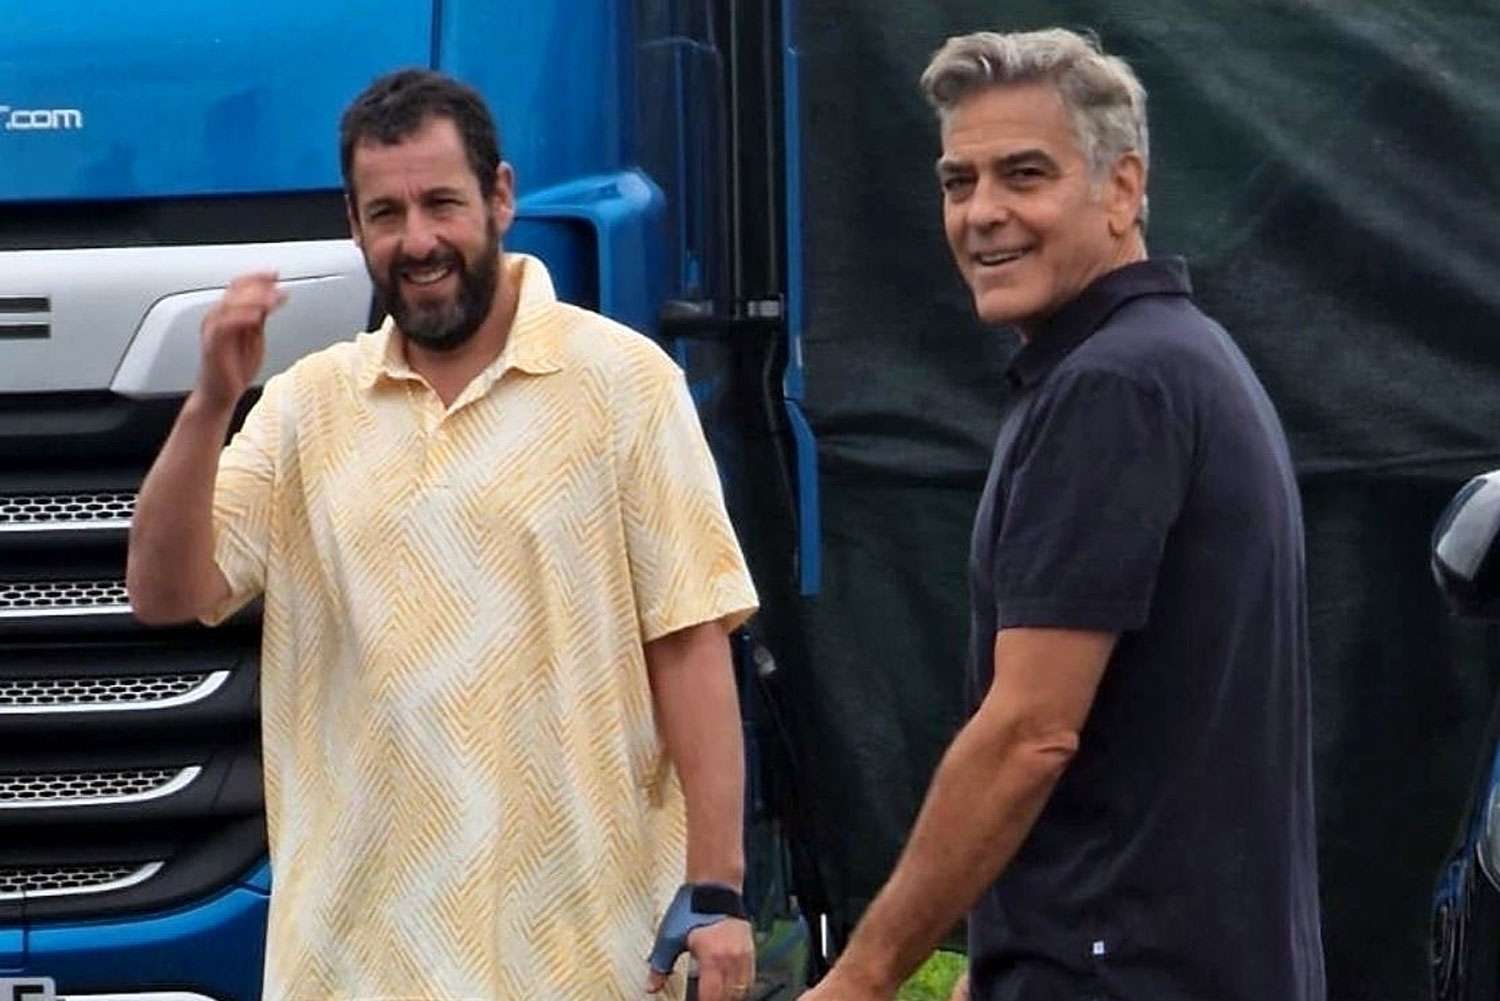 George Clooney Was in 'Upbeat, Cheeky' Mood as He Filmed with Adam Sandler on His Birthday (Exclusive Source)